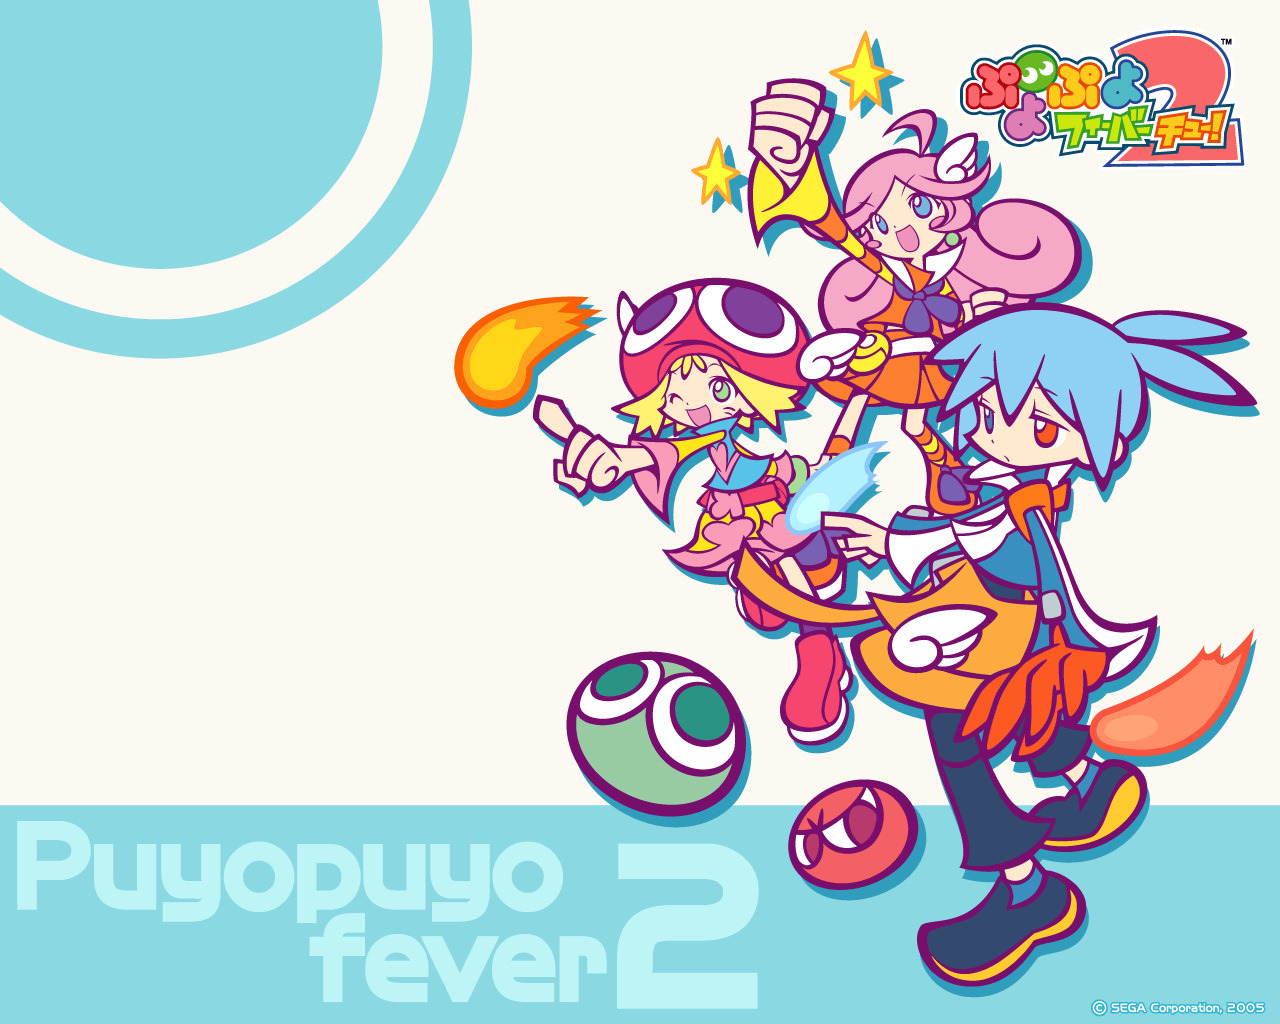 neat fever 2 wallpaper incoming puyo puyo fever 2618537 hd wallpaper backgrounds download